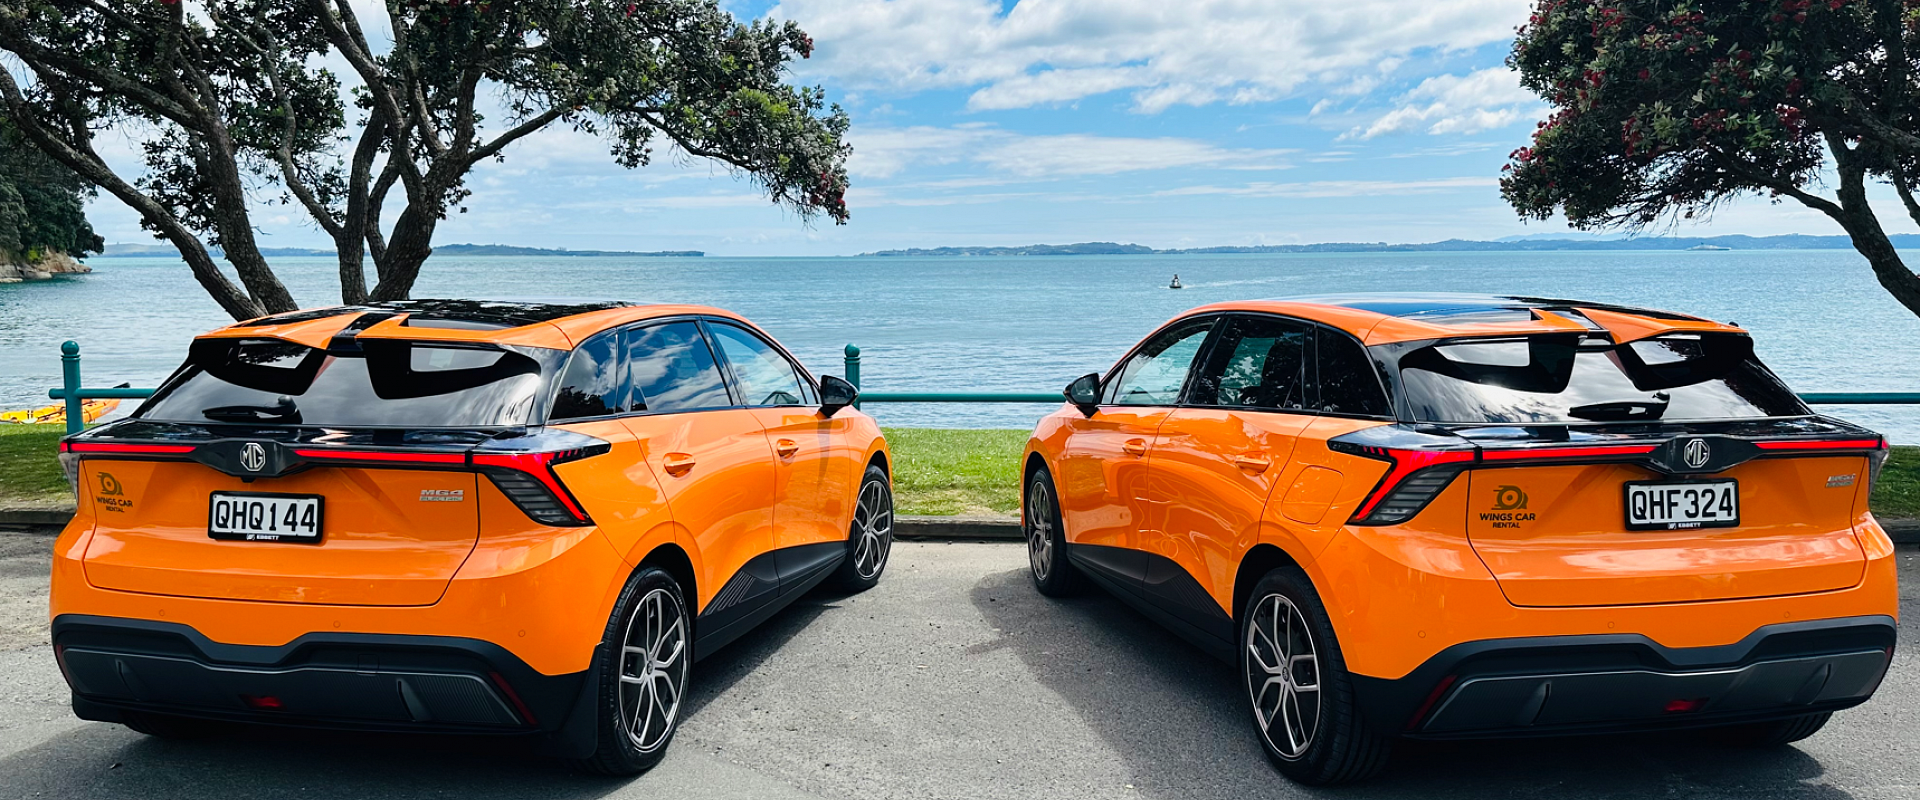 wings-car-rental-auckland-home-page-cover-image-two-orange-electric-cars-near-beach